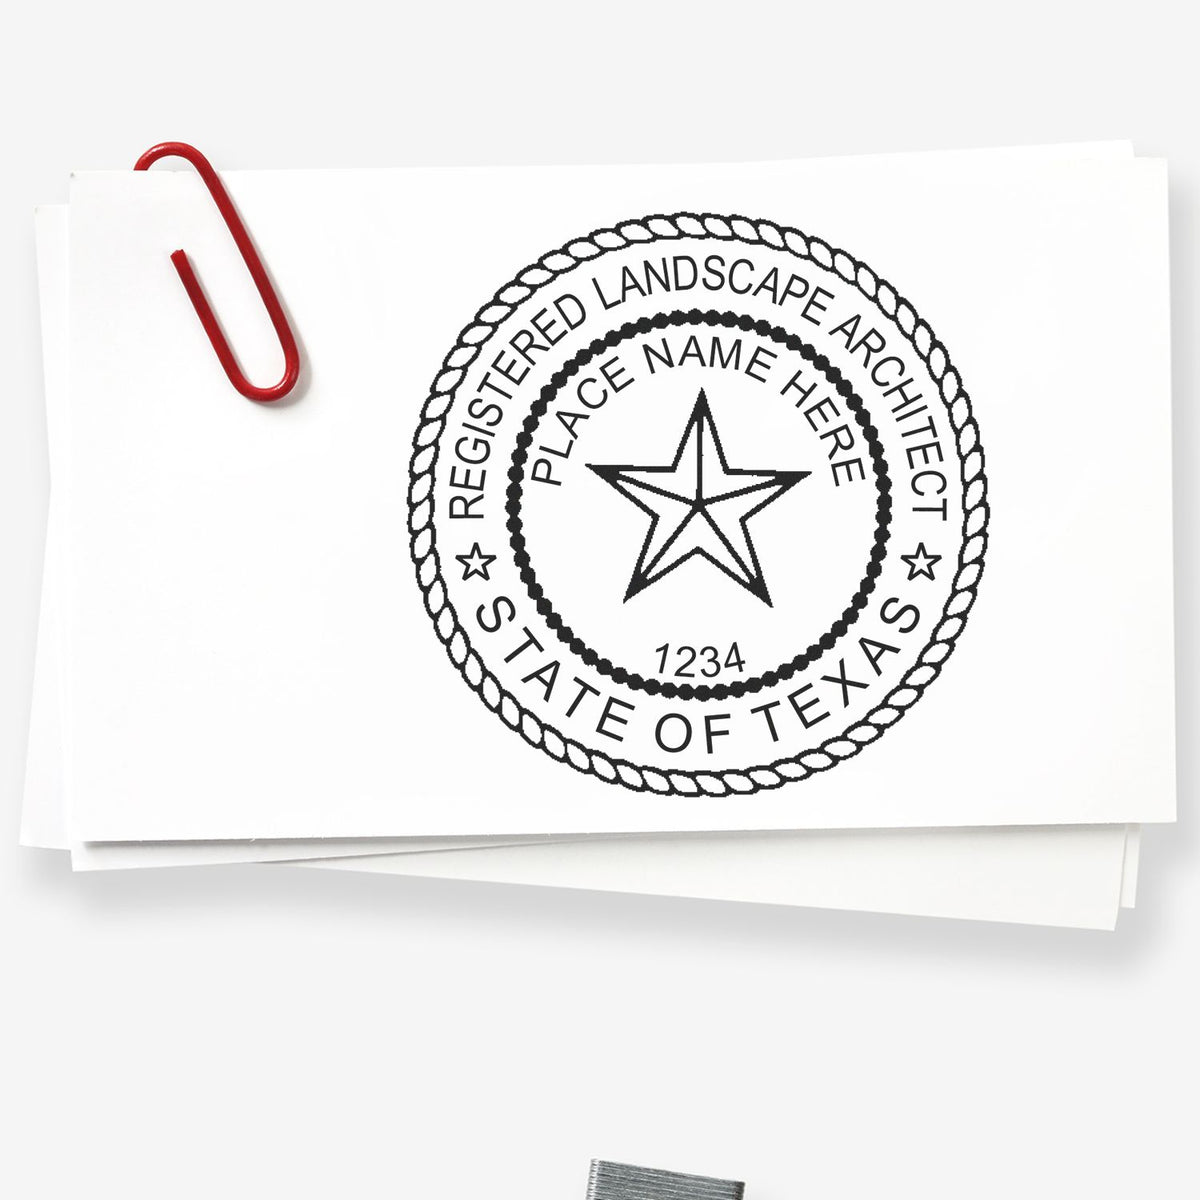 A stamped impression of the Digital Texas Landscape Architect Stamp in this stylish lifestyle photo, setting the tone for a unique and personalized product.